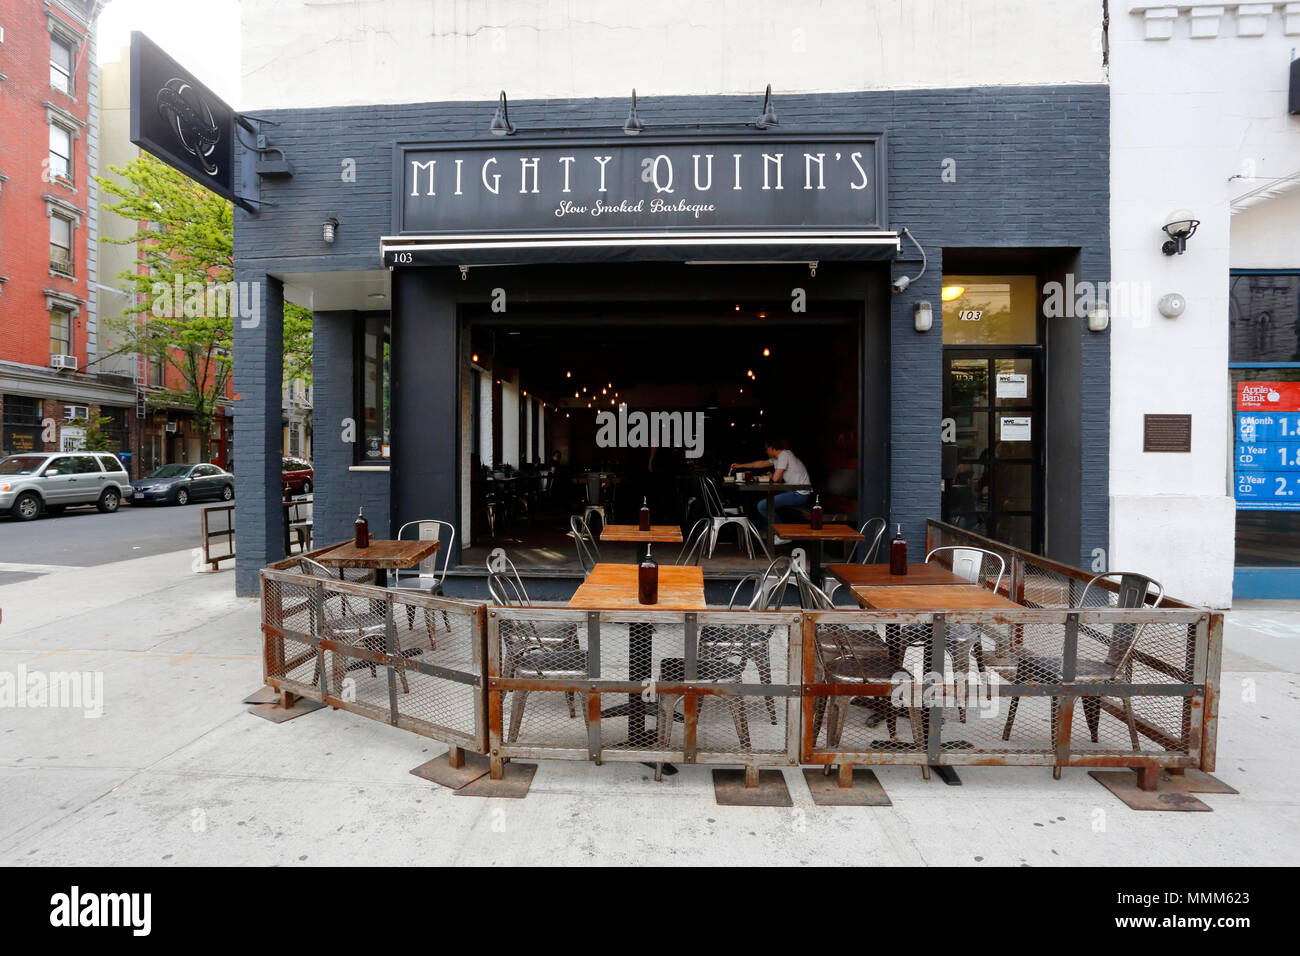 Mighty Quinn's Barbeque, 103 Second Ave, New York, NY. exterior storefront of a bbq eatery in the East Village neighborhood of Manhattan. Stock Photo